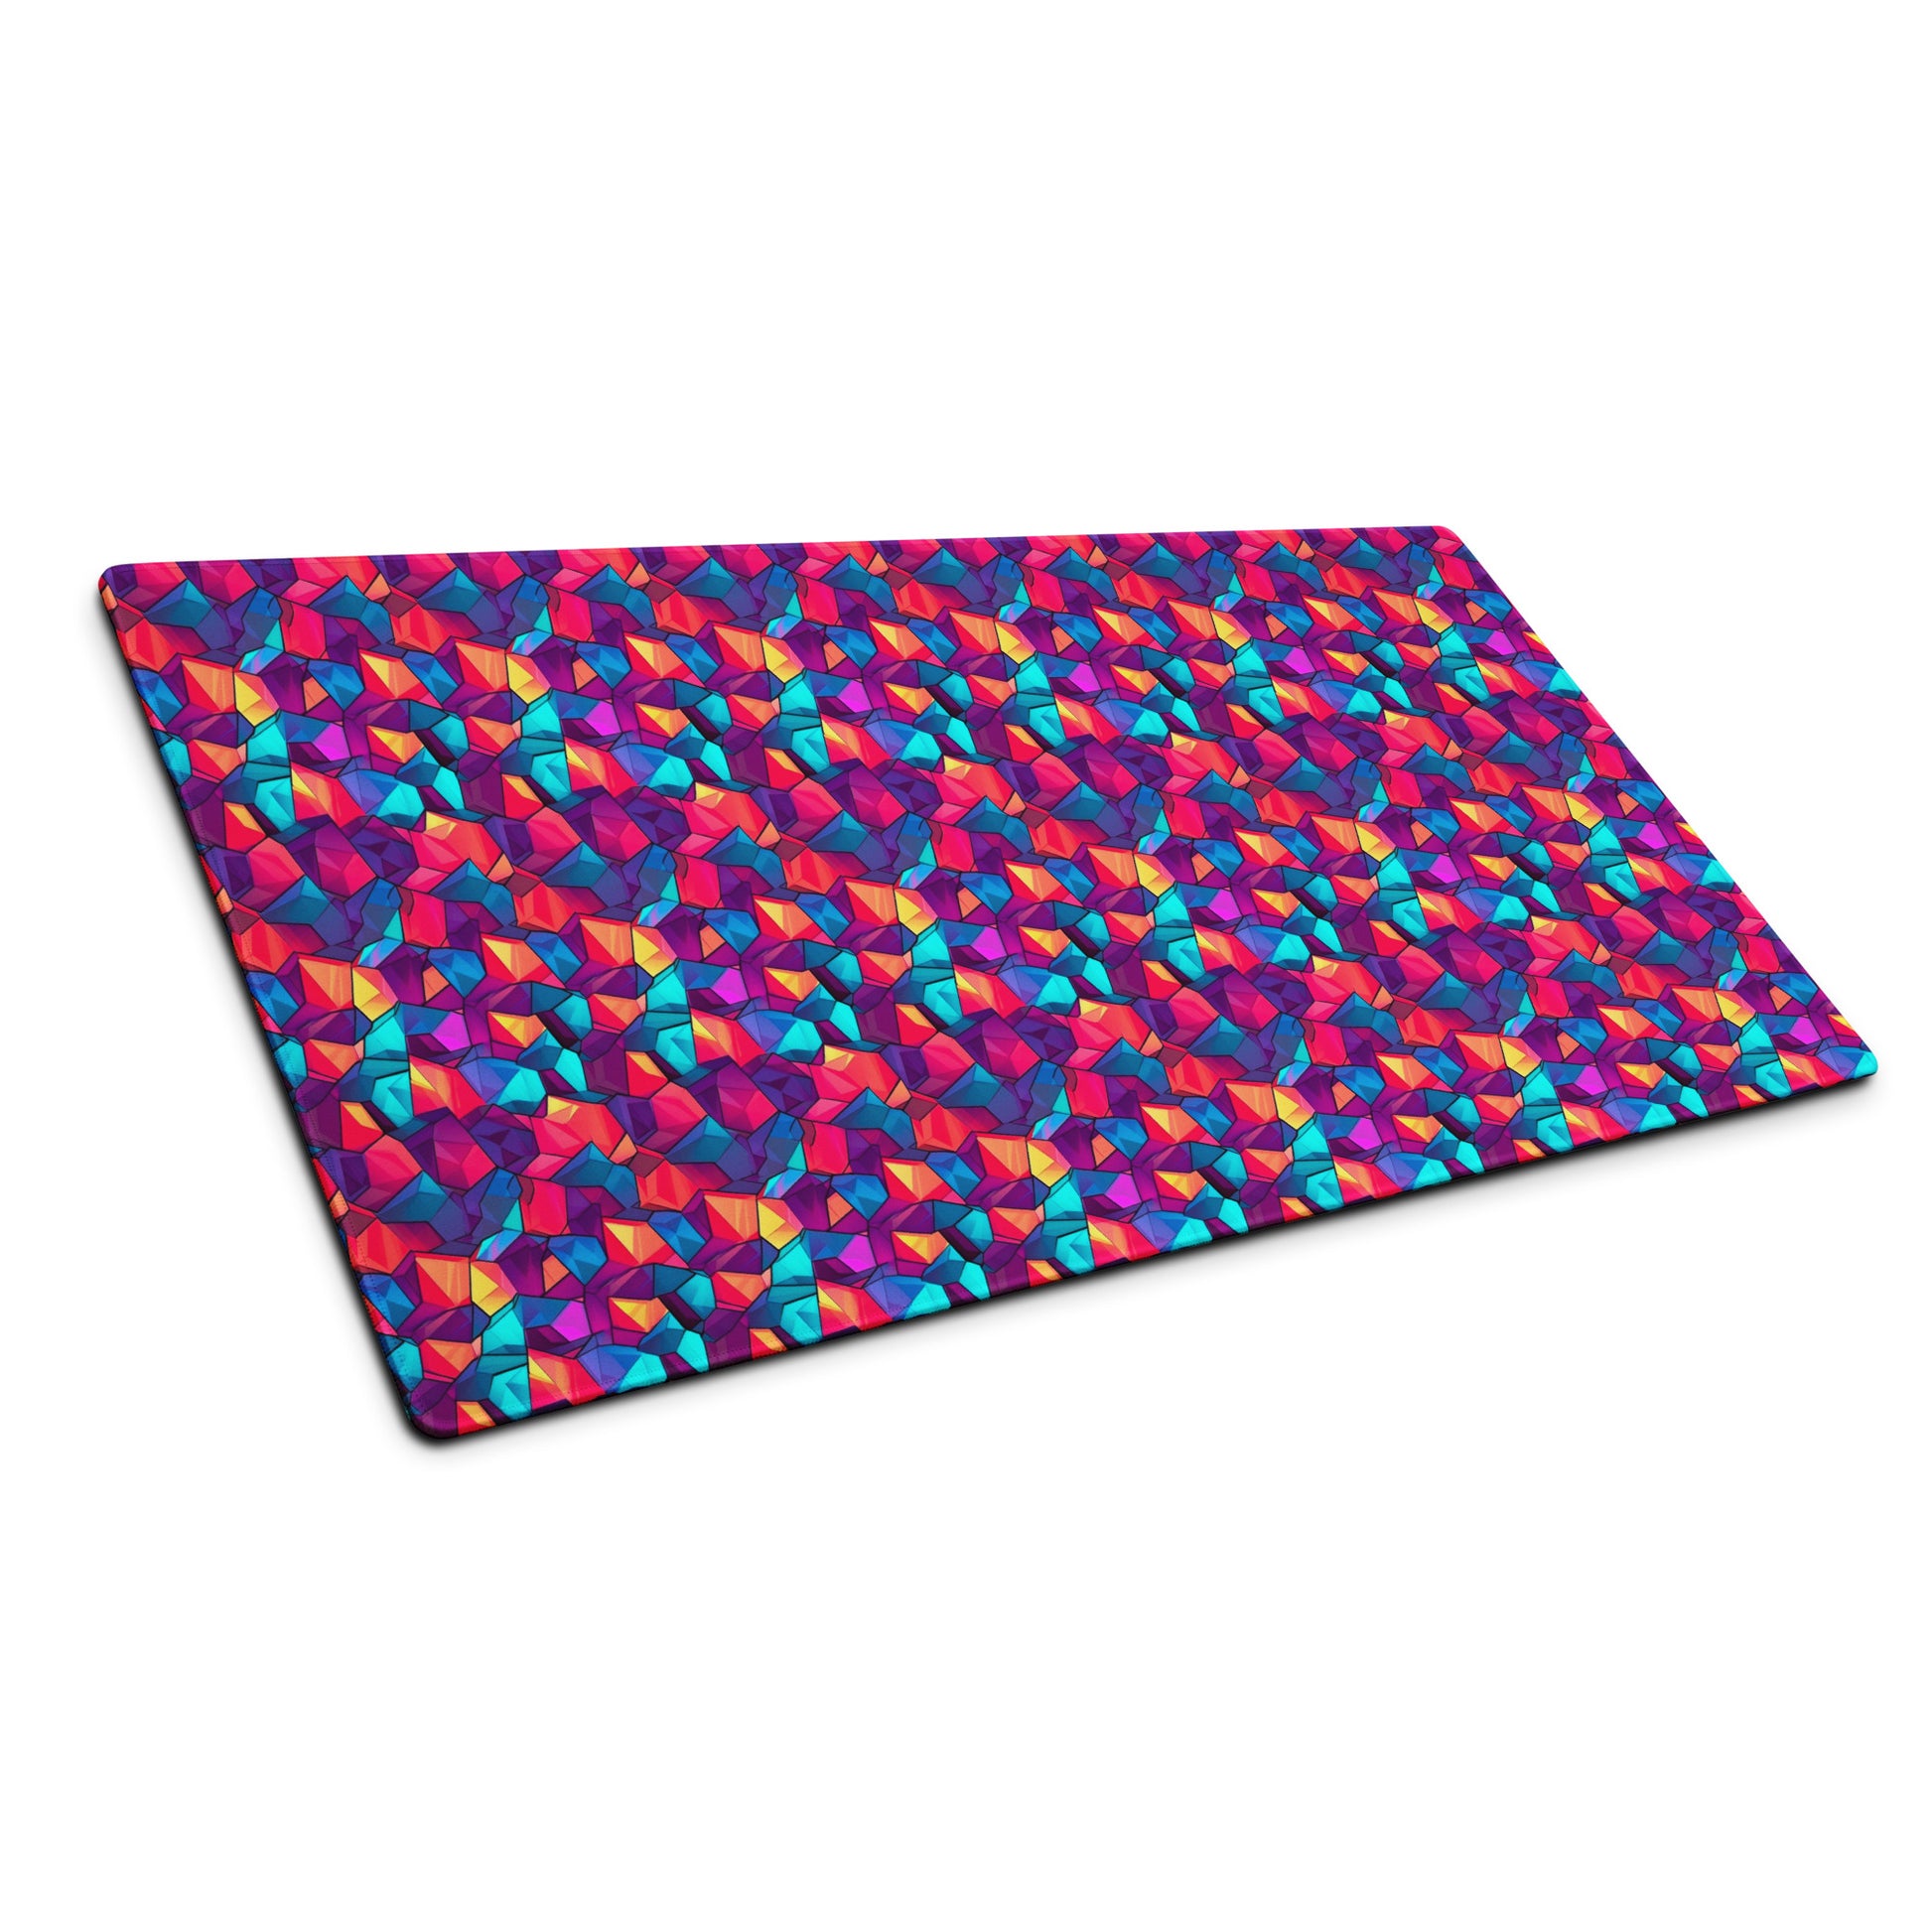 A 36" x 18" gaming desk pad with red, blue, and purple crystals sitting at an angle.